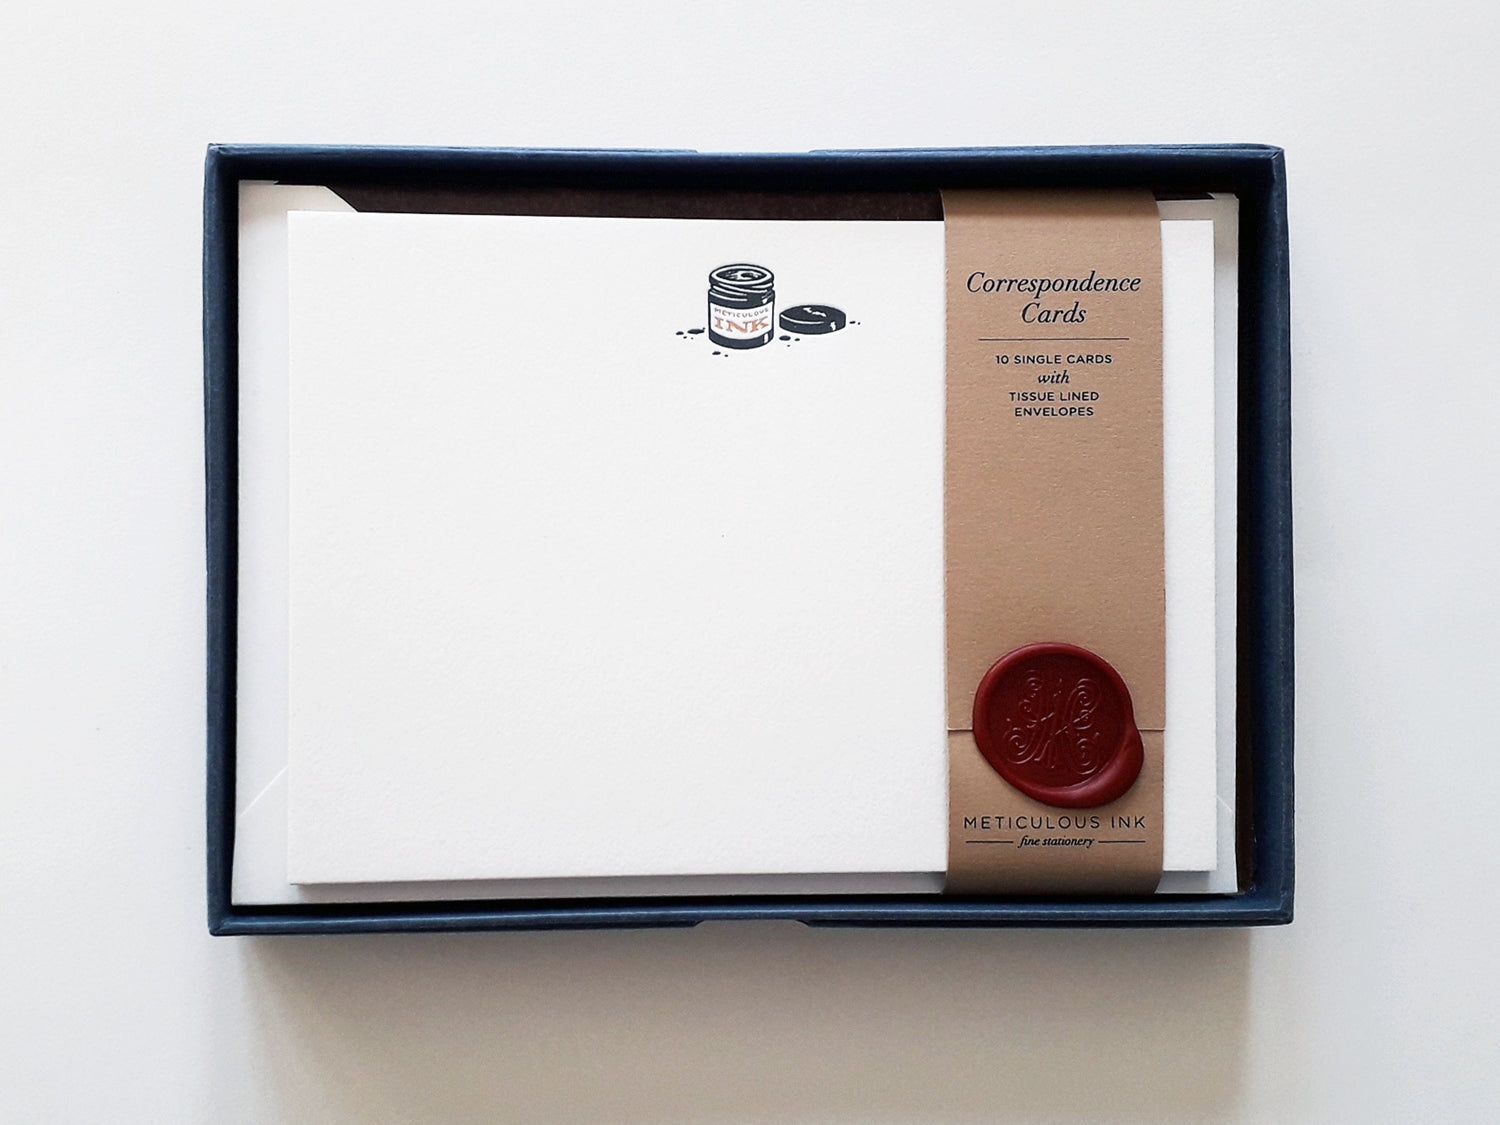 Ink Pot Letterpress Correspondence Cards in display box with wax seal